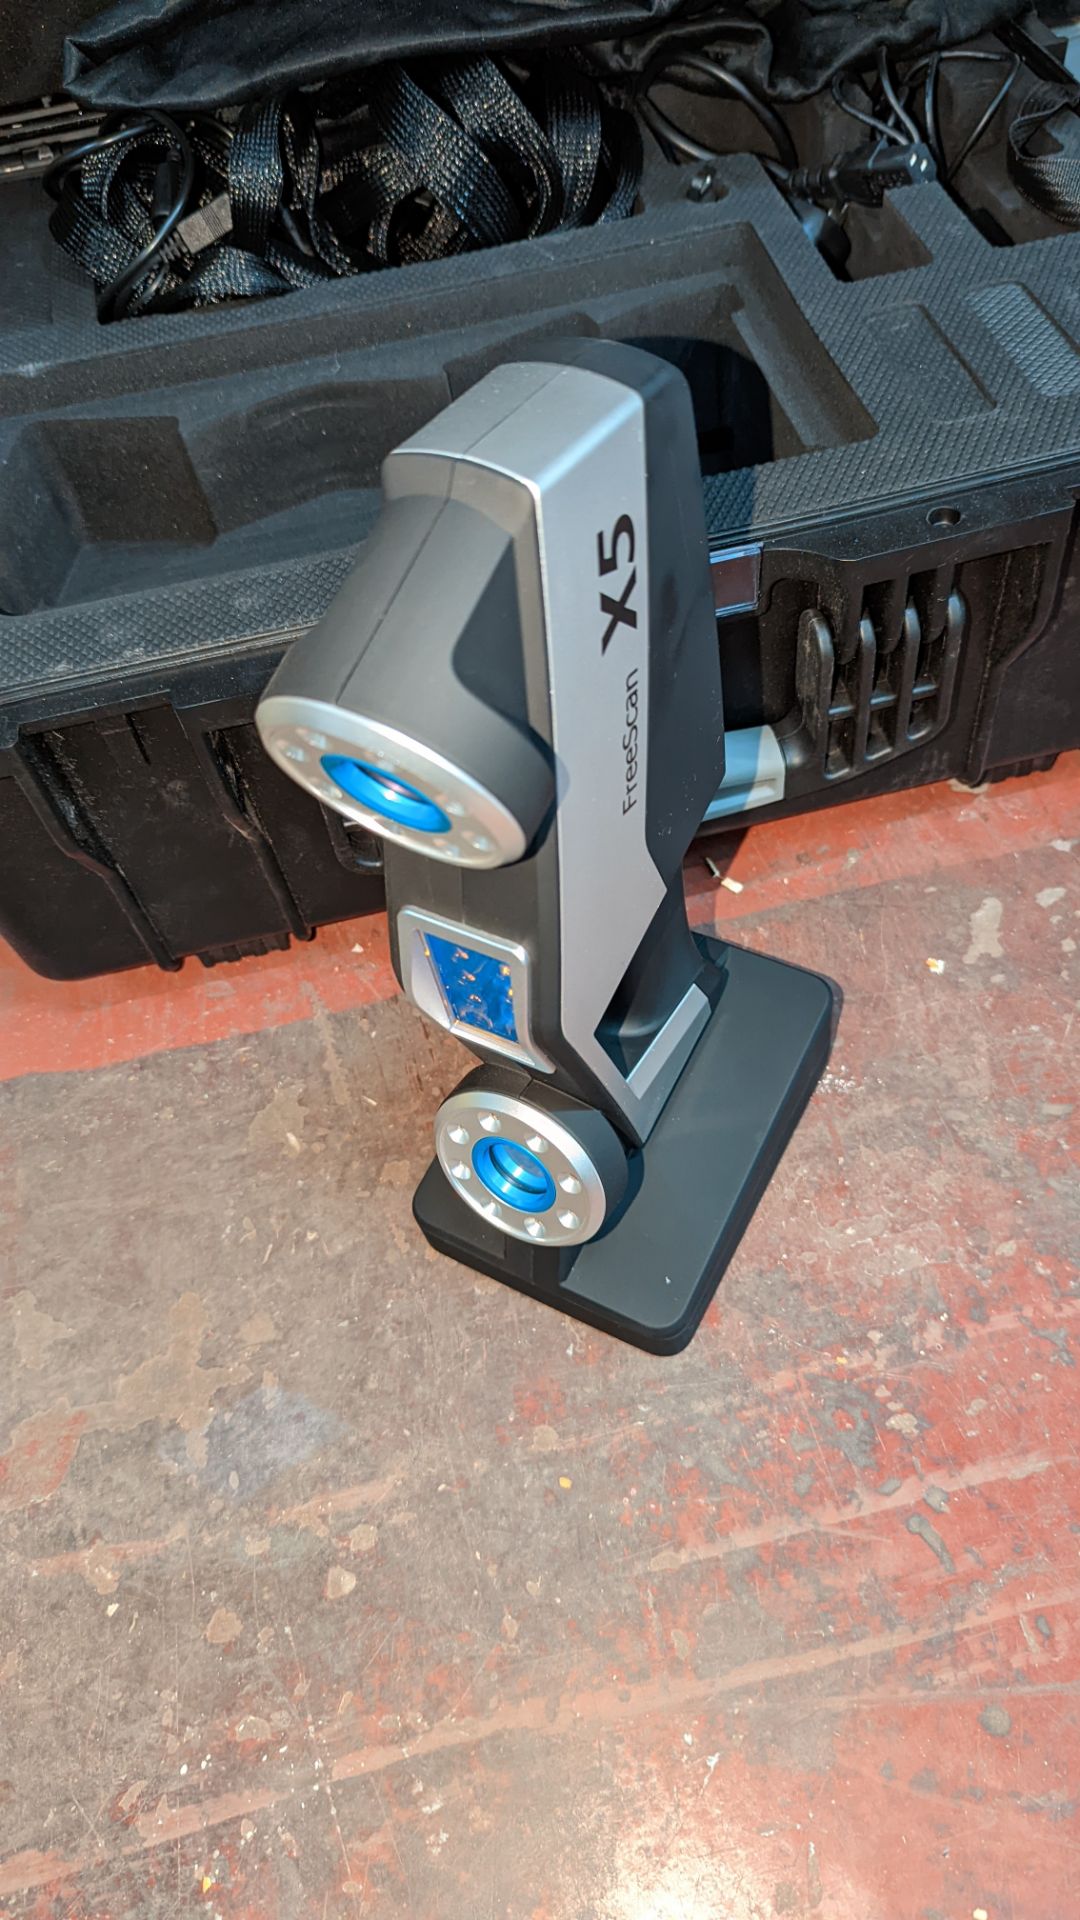 FreeScan X5 3D scanner including carry case & ancillaries